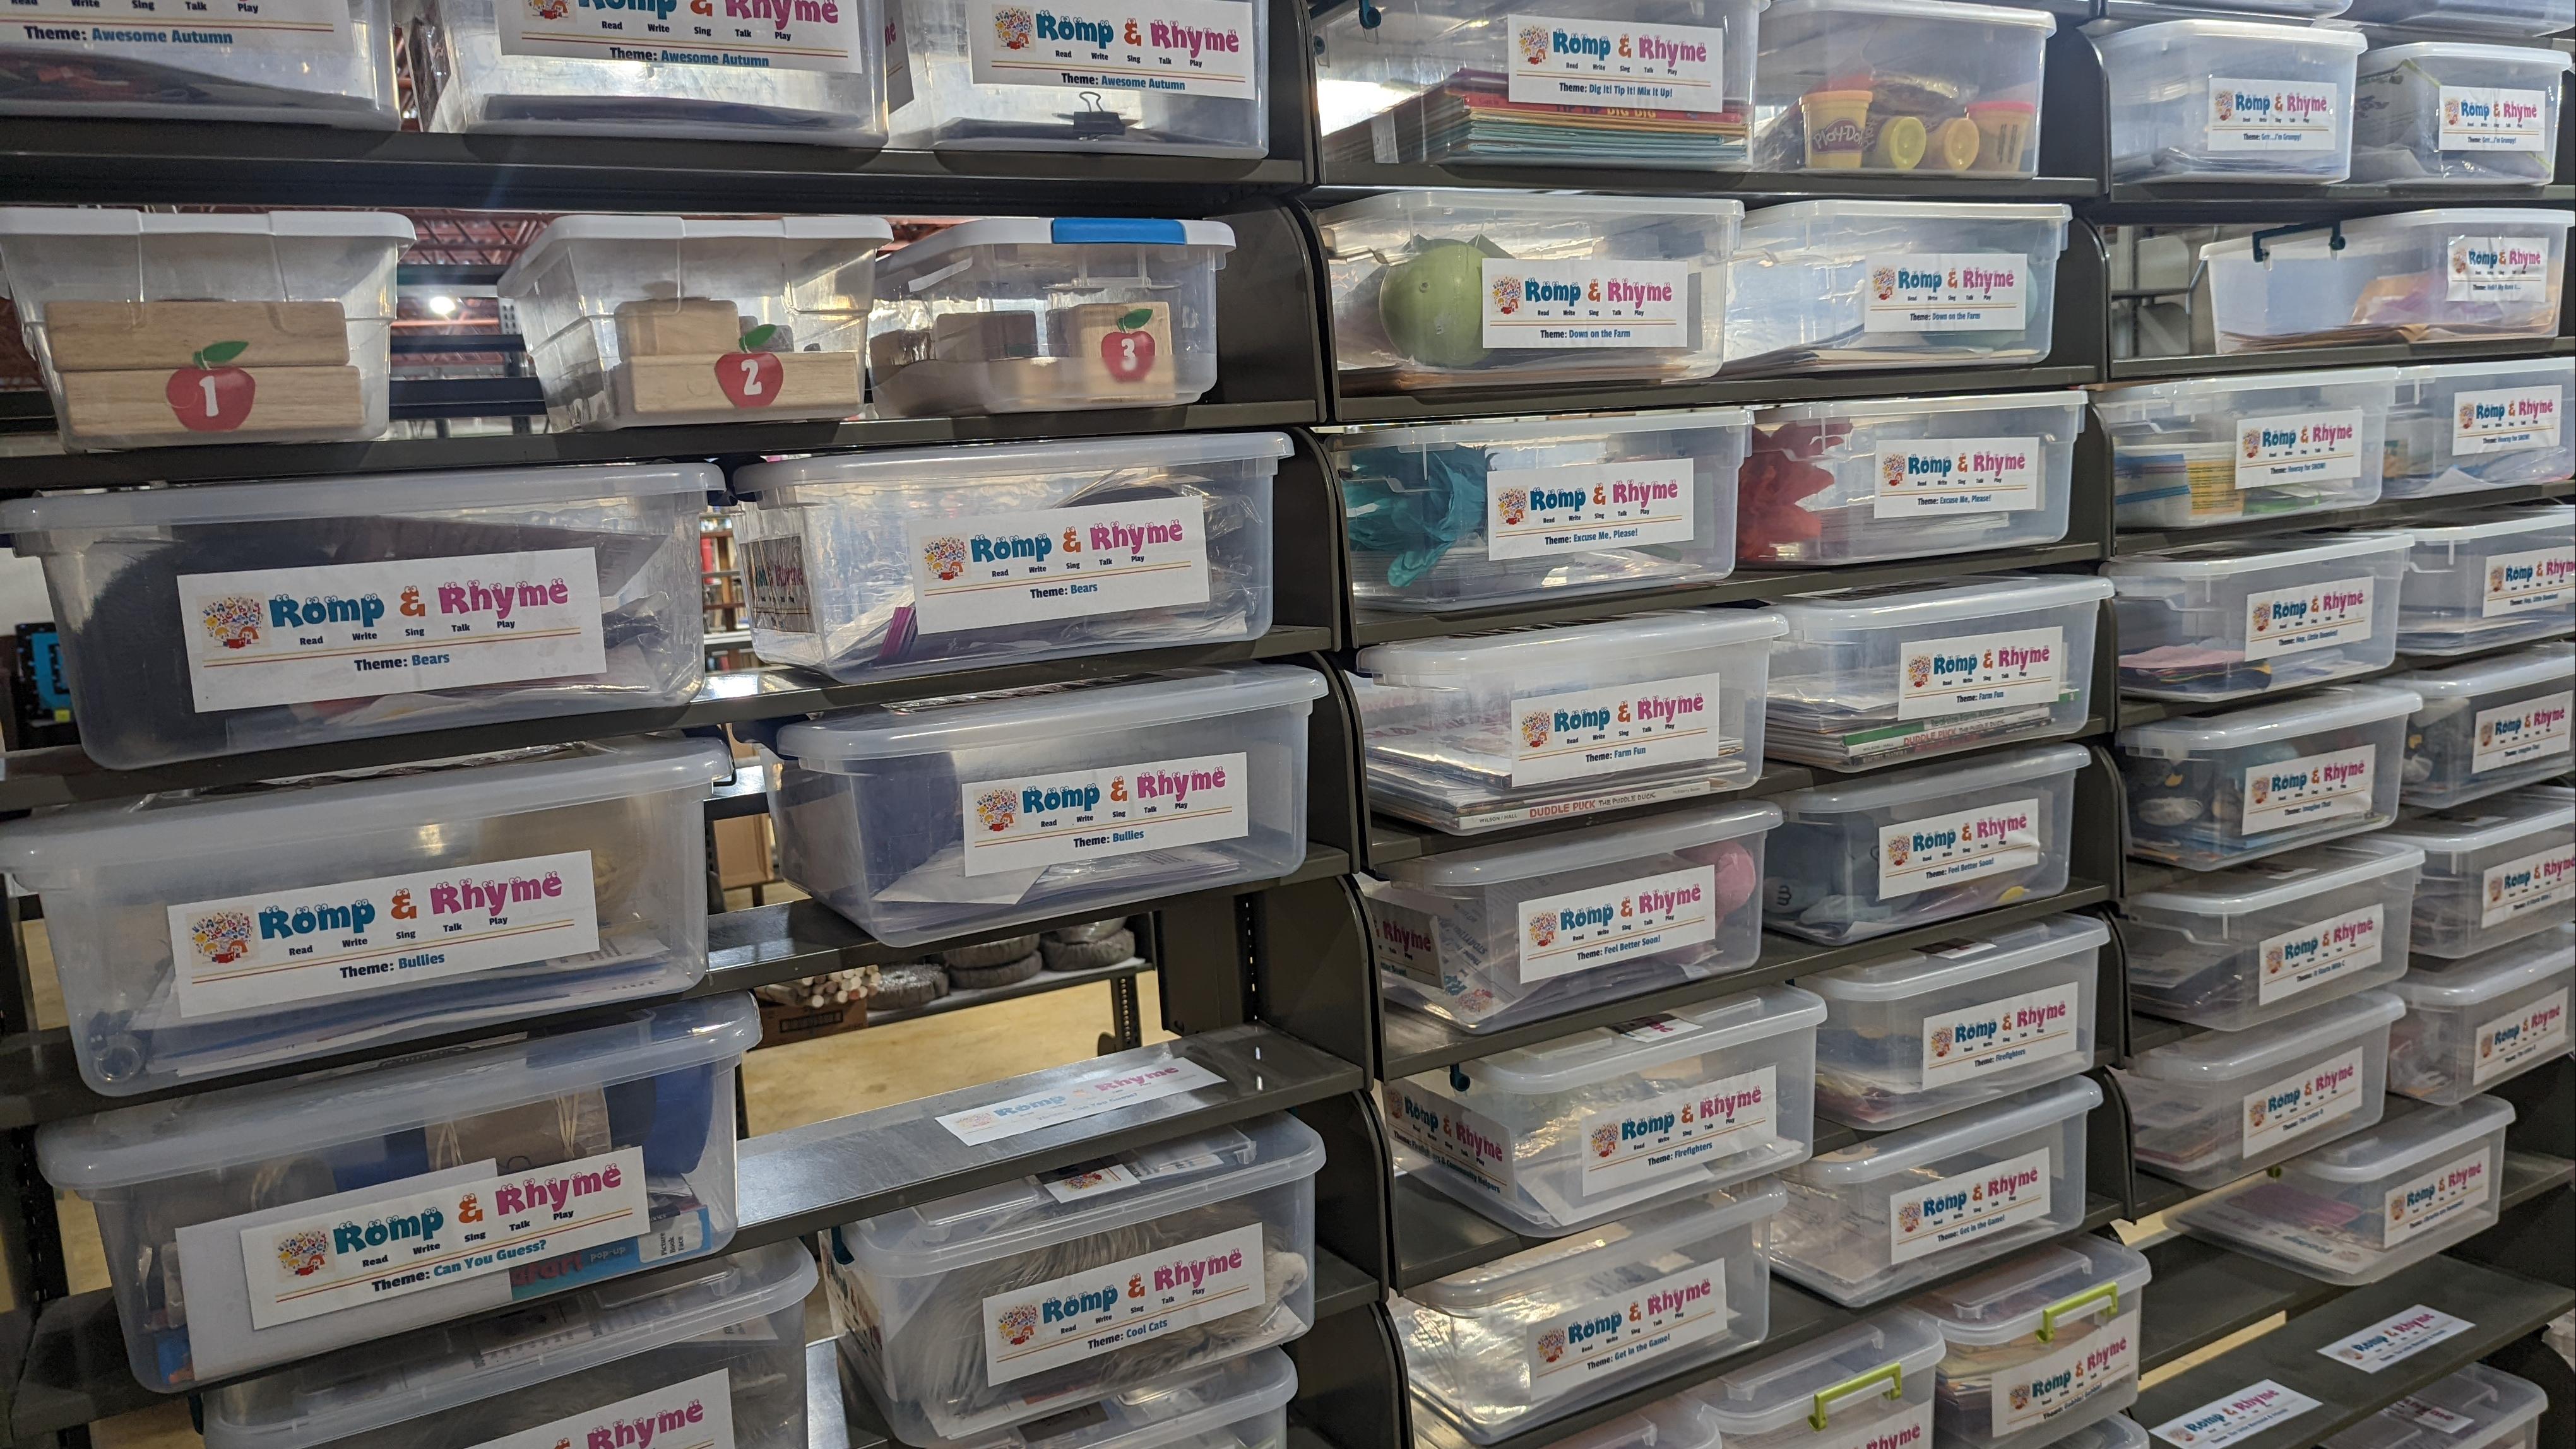 A photograph of dozens of transparent plastic bins, labeled "Romp and Rhyme" on each end.